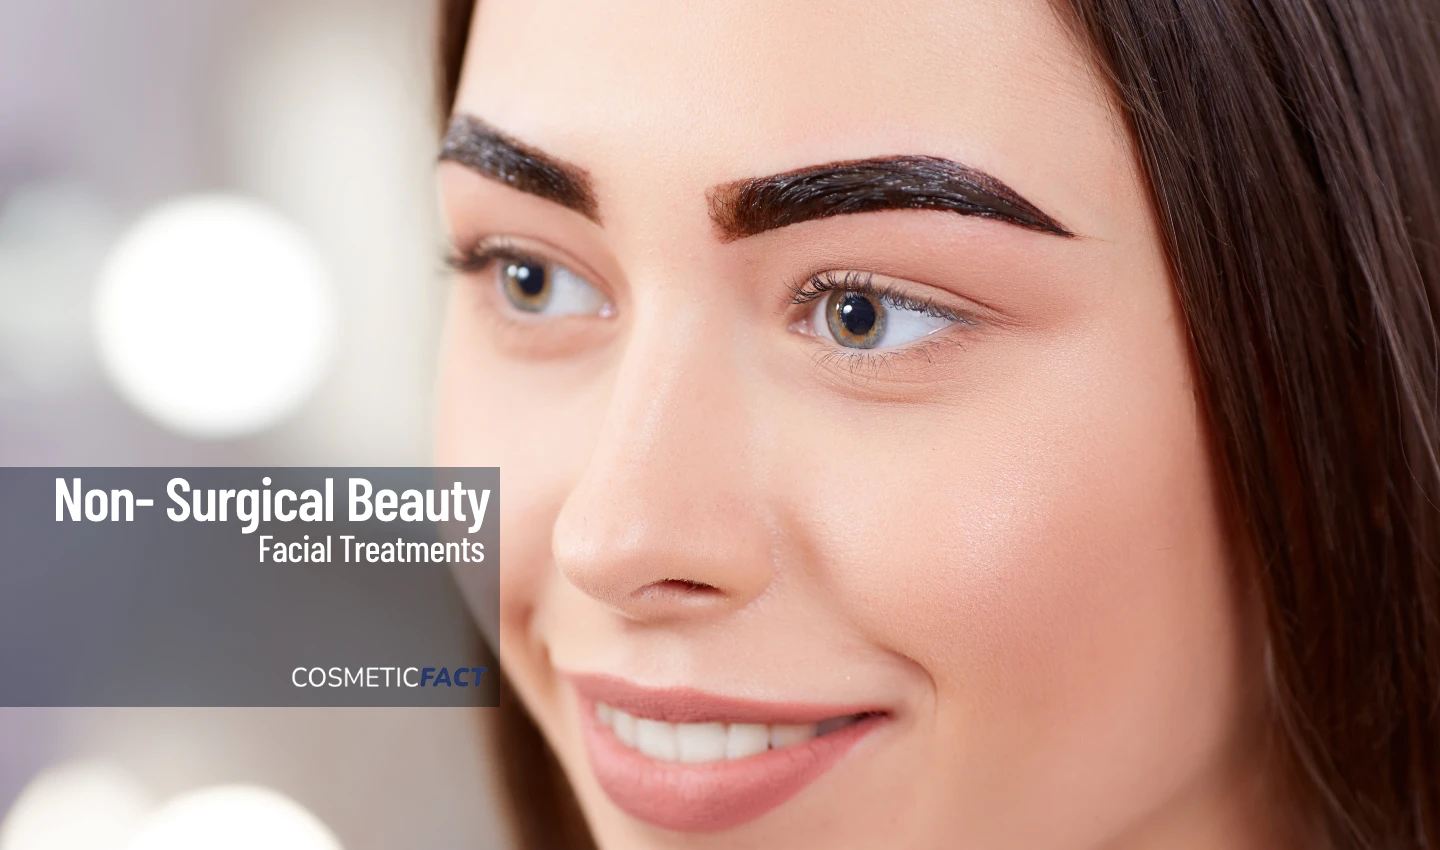 Image of a woman with beautifully microbladed eyebrows, showcasing the transformative power of microblading.